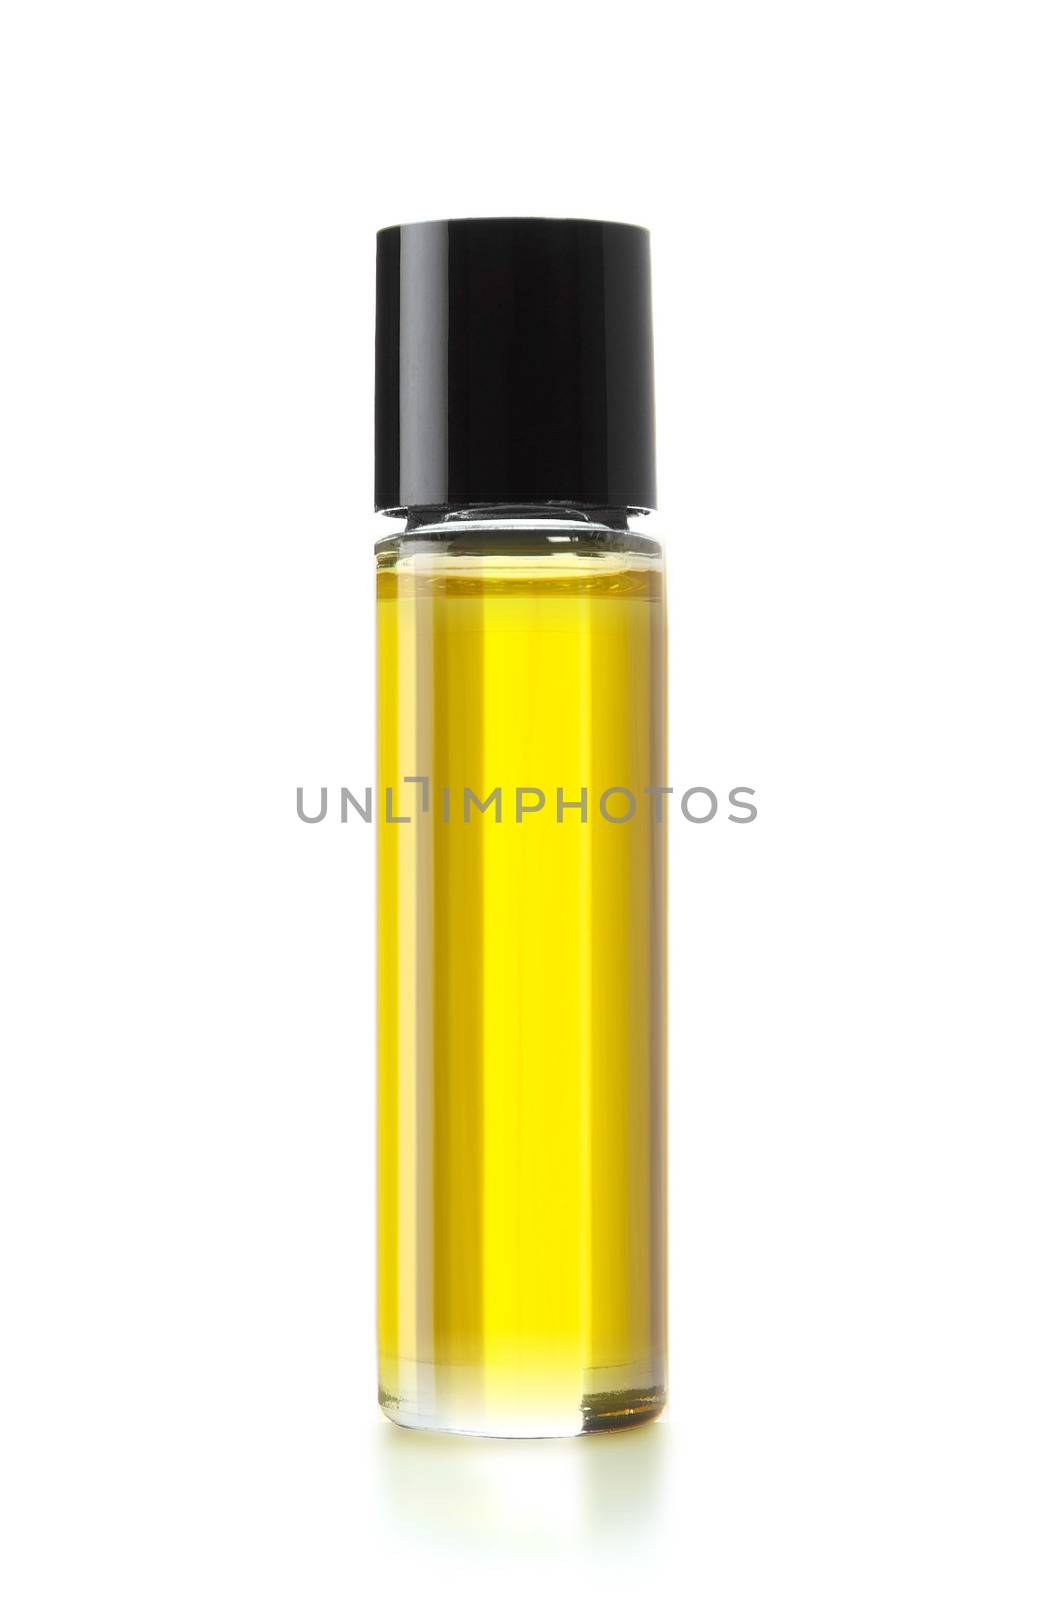 Bottle of perfume on white background, (clipping work path included).